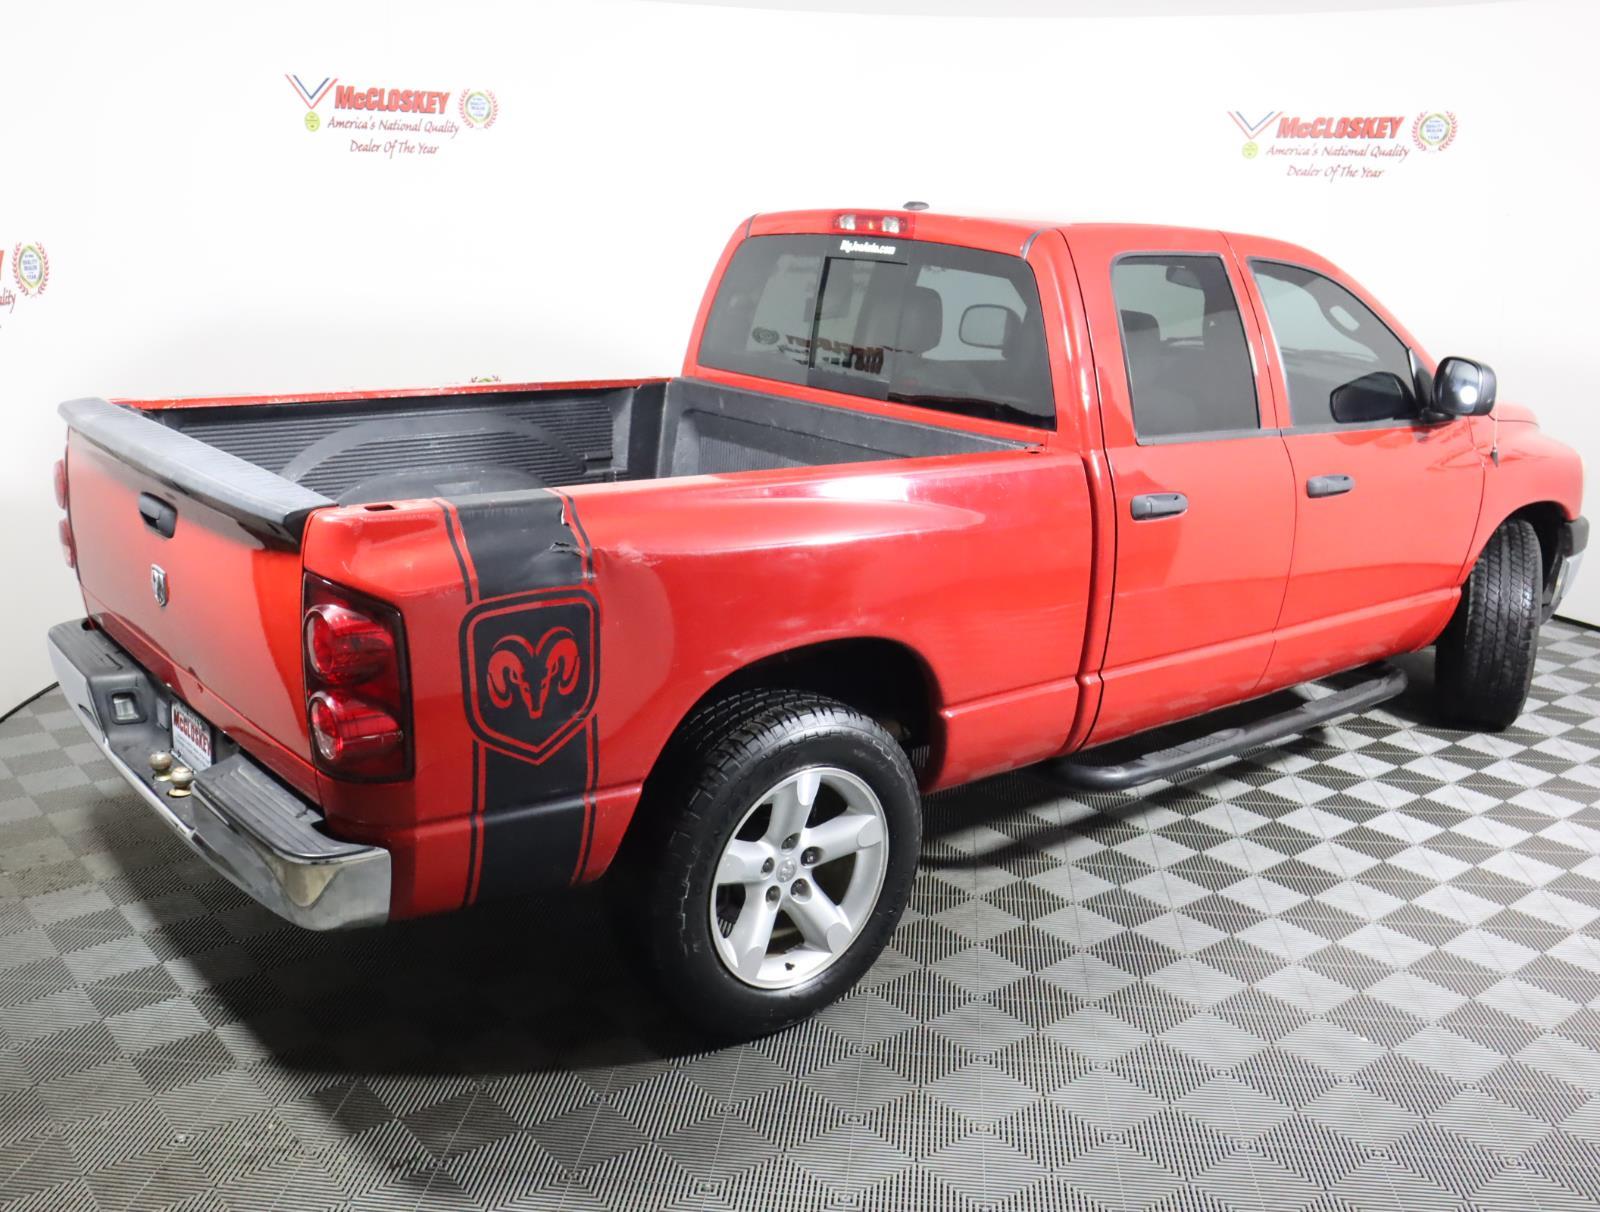 Preowned 2008 Dodge Ram SLT  V8! CREW CAB! for sale by McCloskey Imports & 4X4's in Colorado Springs, CO